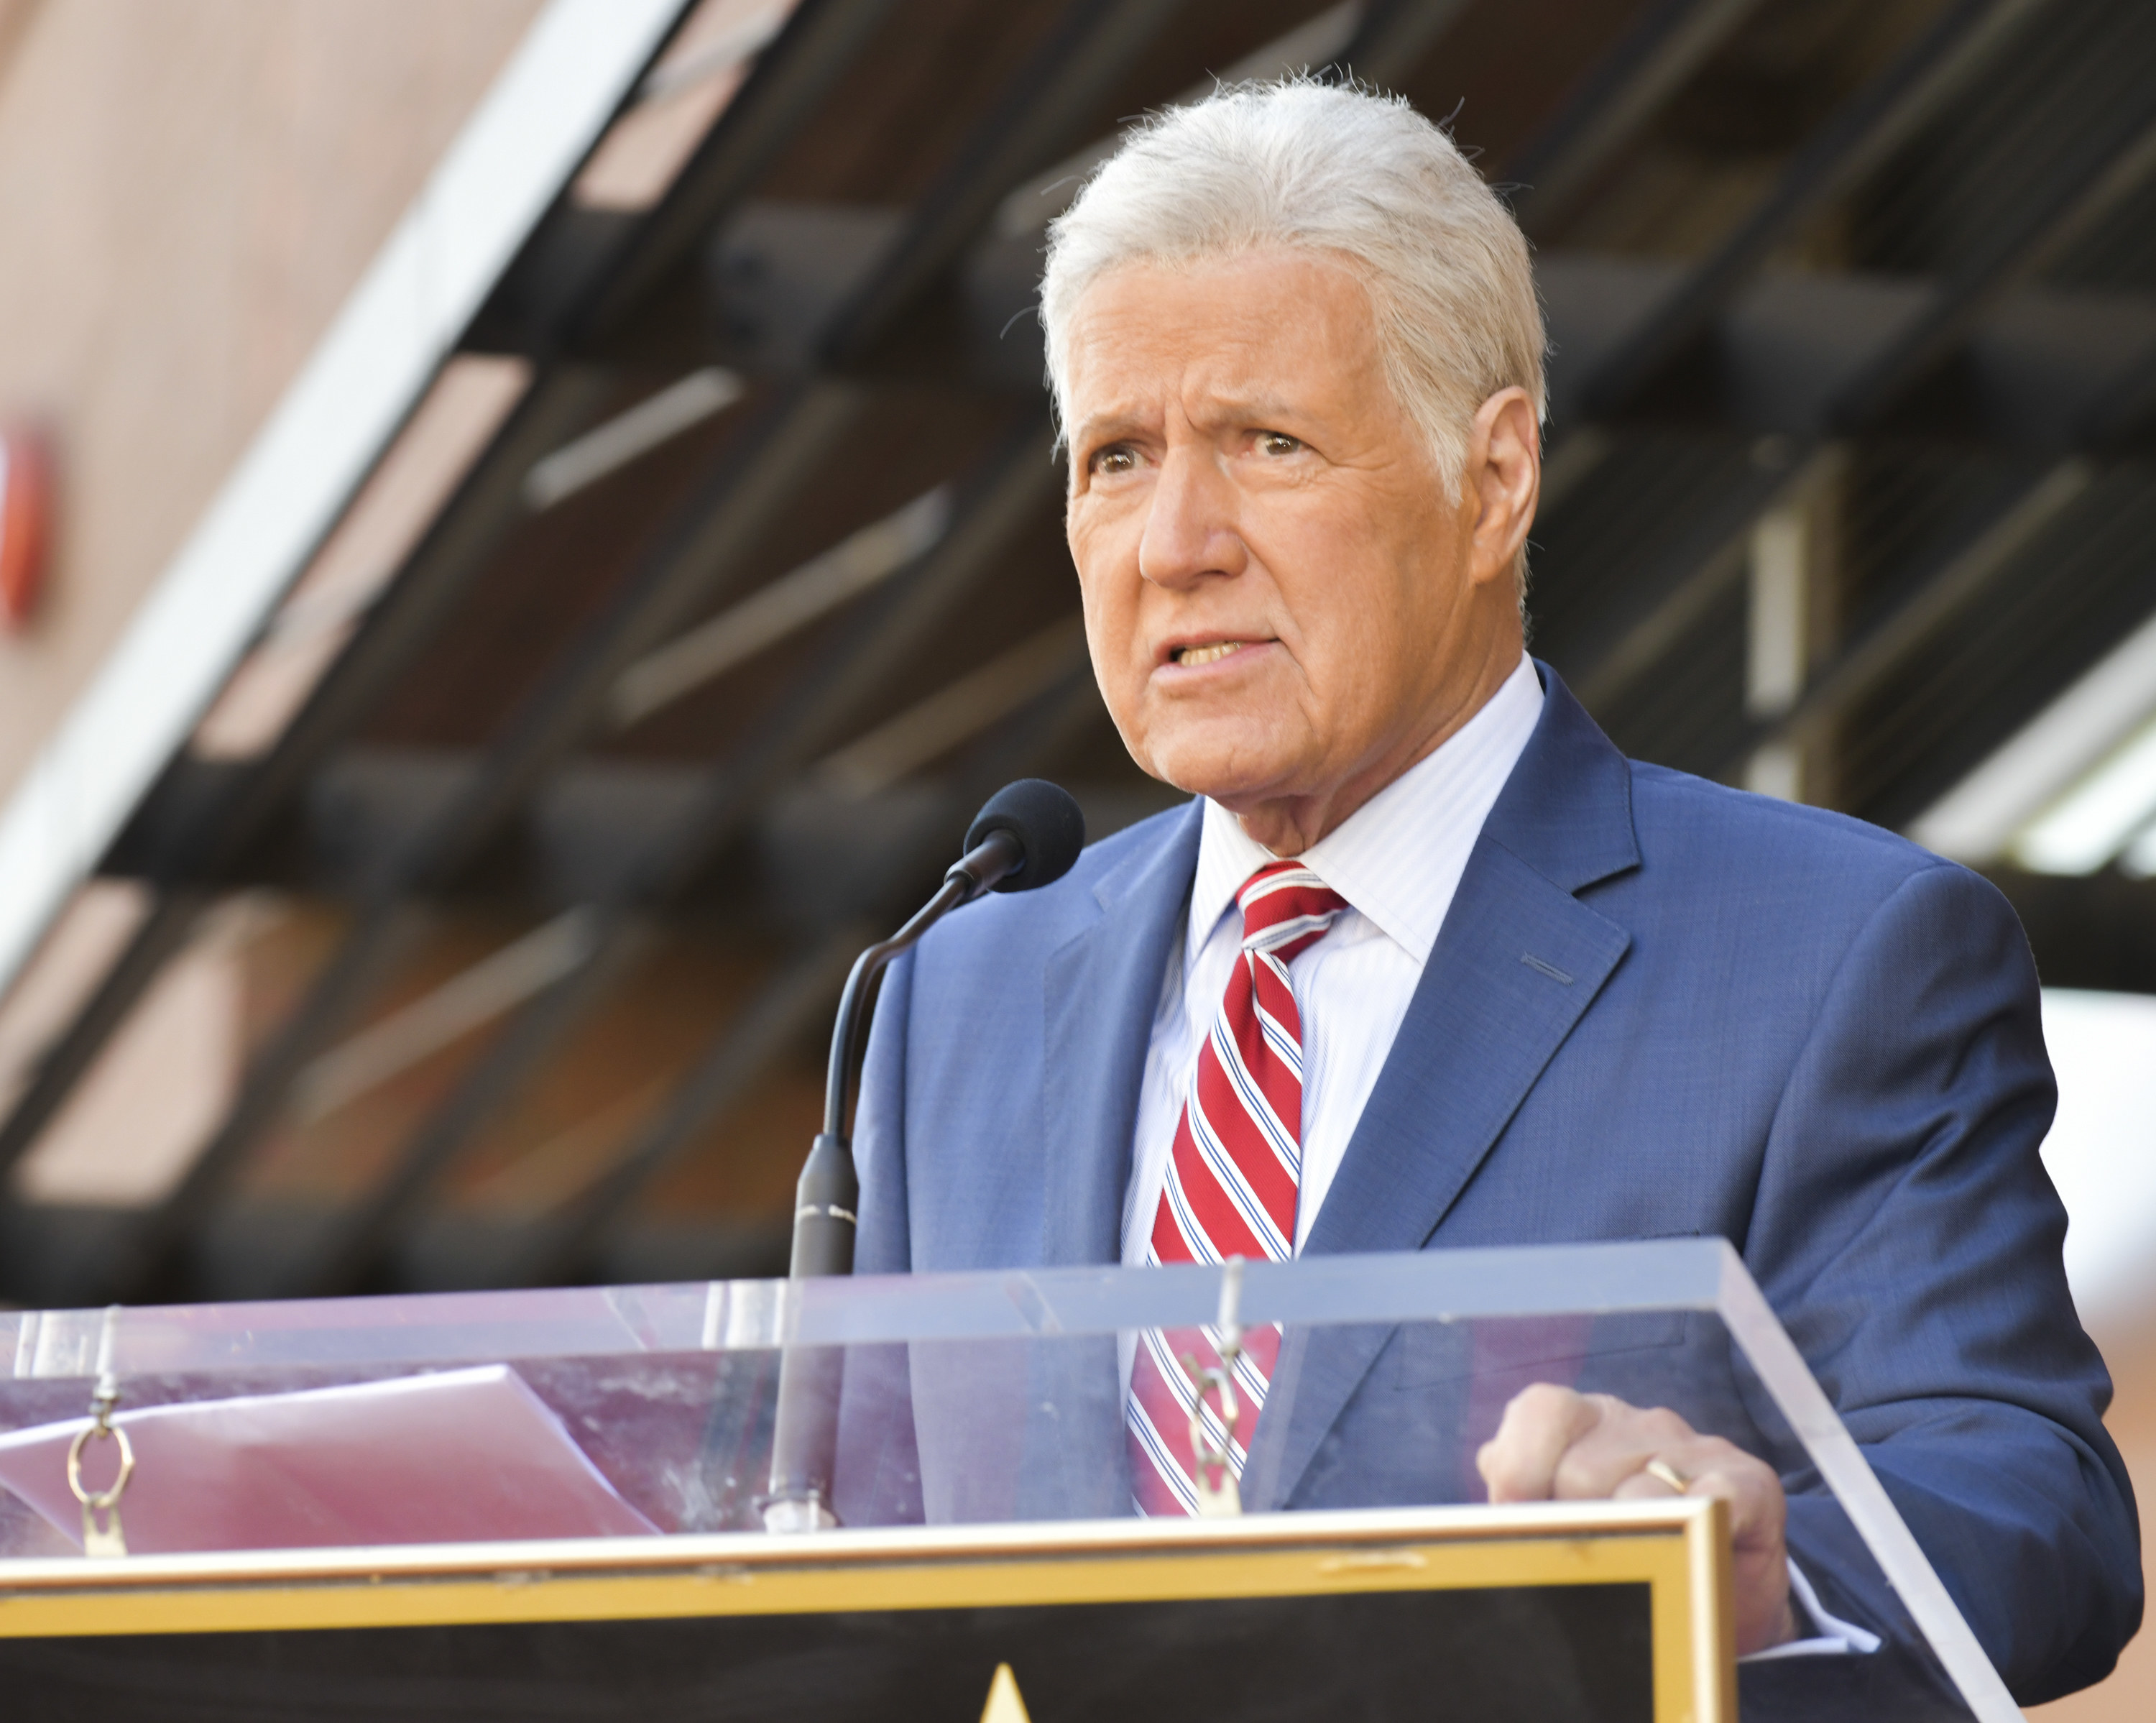 Alex Trebek speaks at Harry Friedman Honored With A Star On The Hollywood Walk Of Fame on November 01, 2019 in Hollywood, California